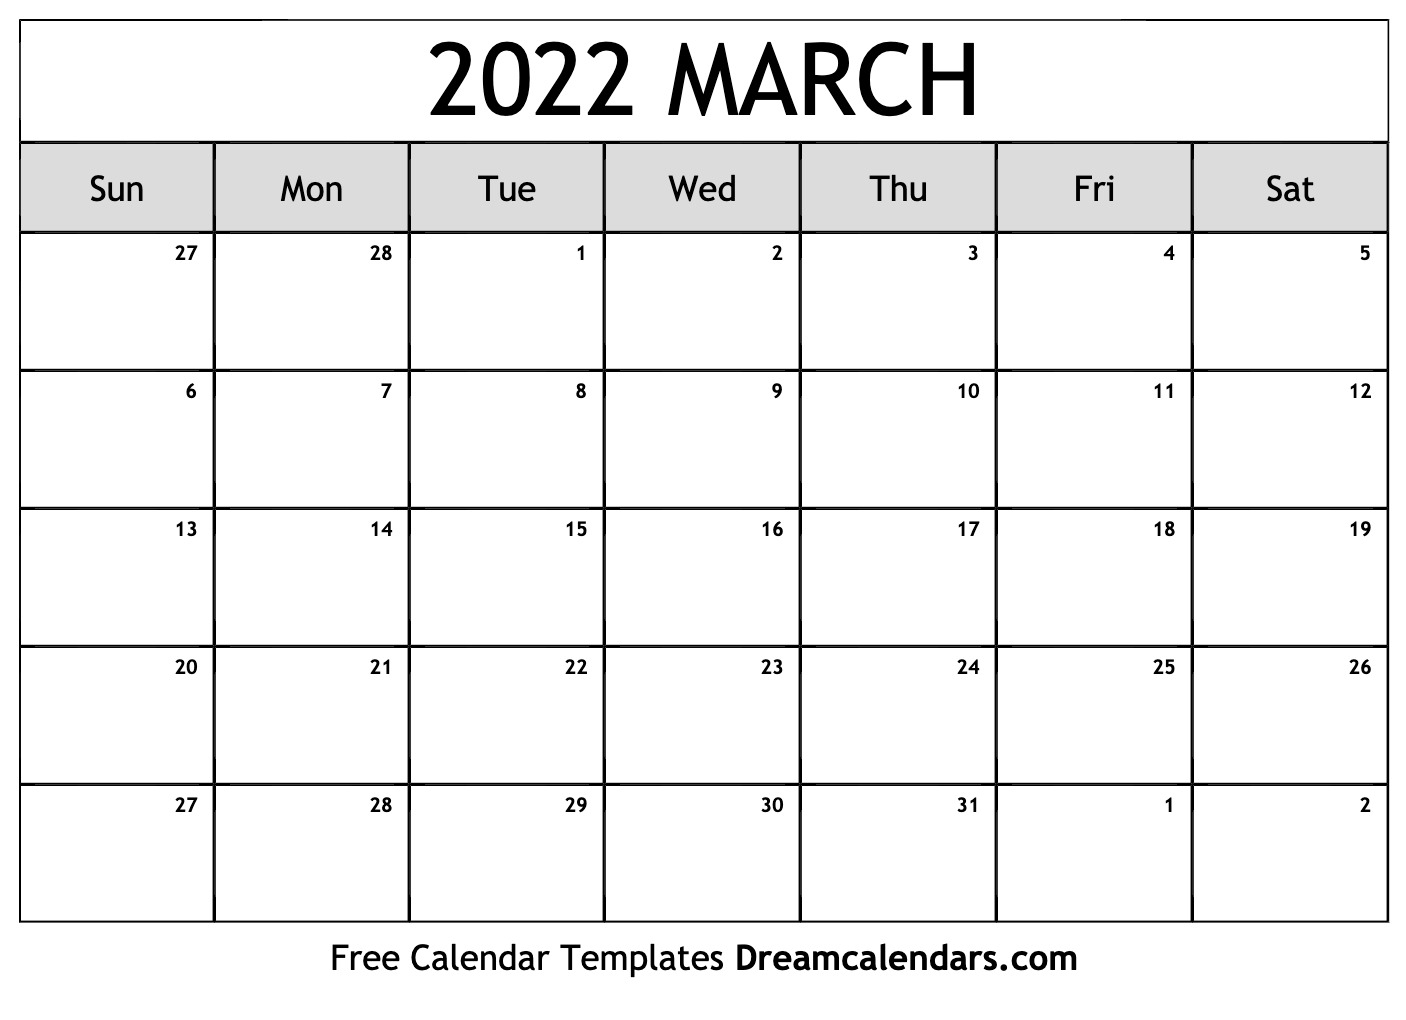 Collect Calendar 2022 March With Festivals